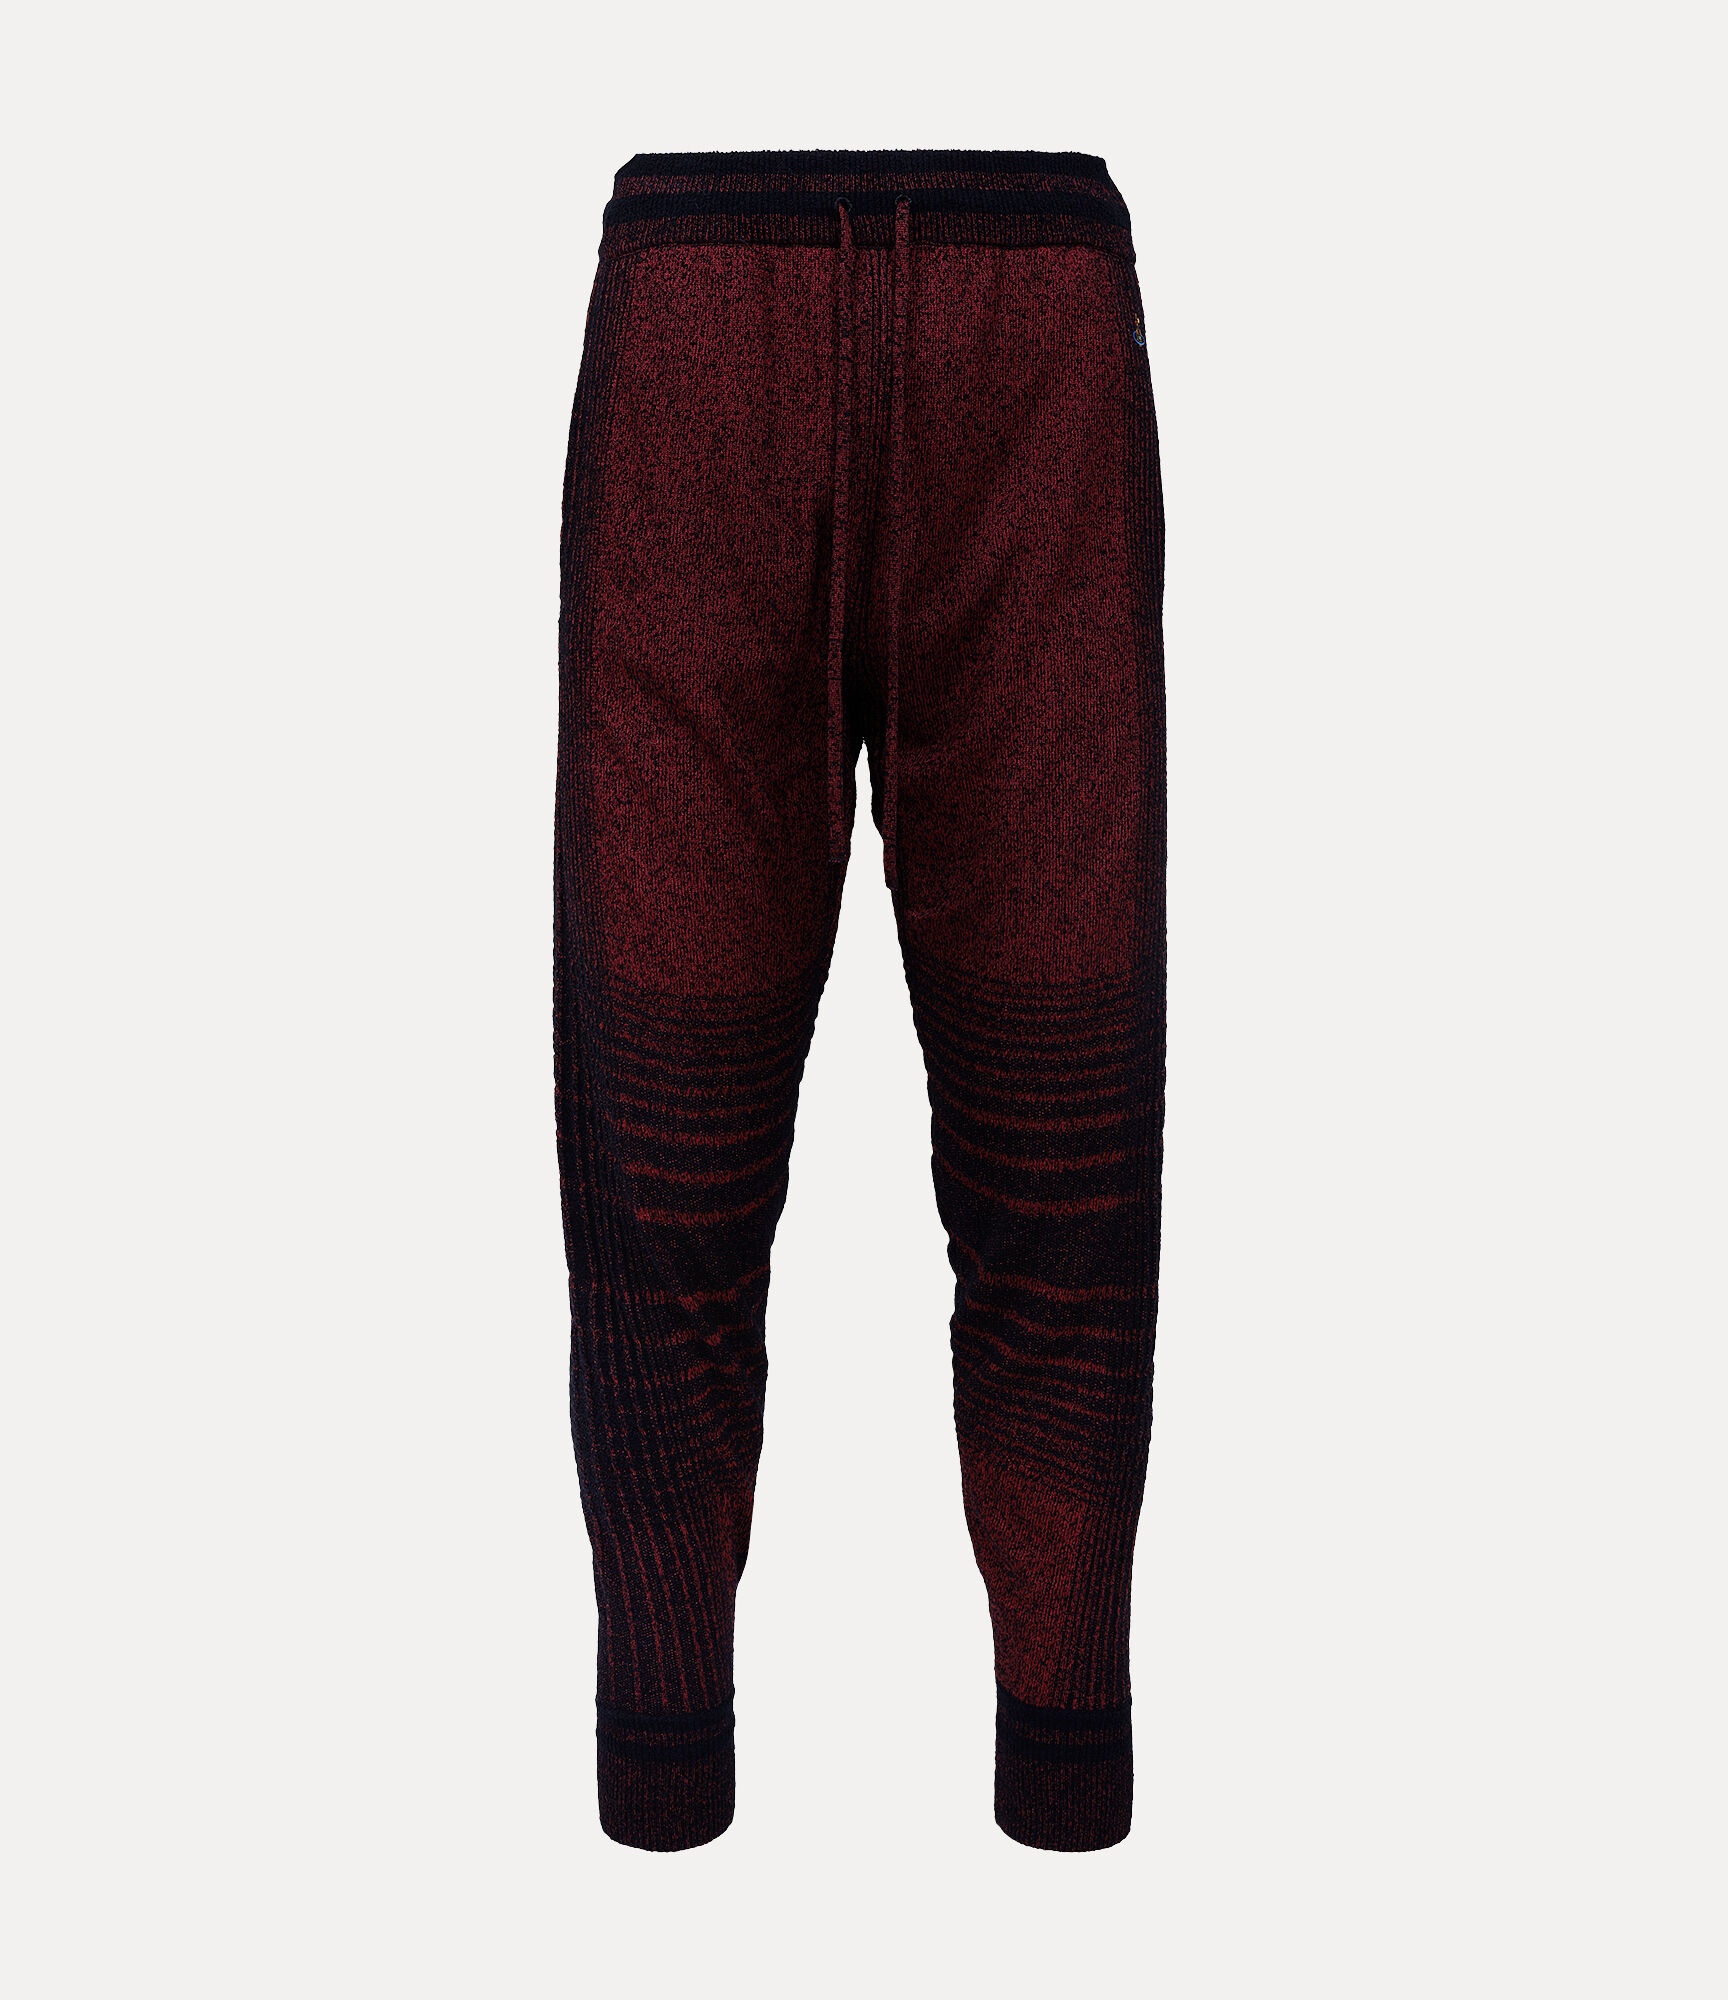 MADRAS CHECK TROUSERS - 1